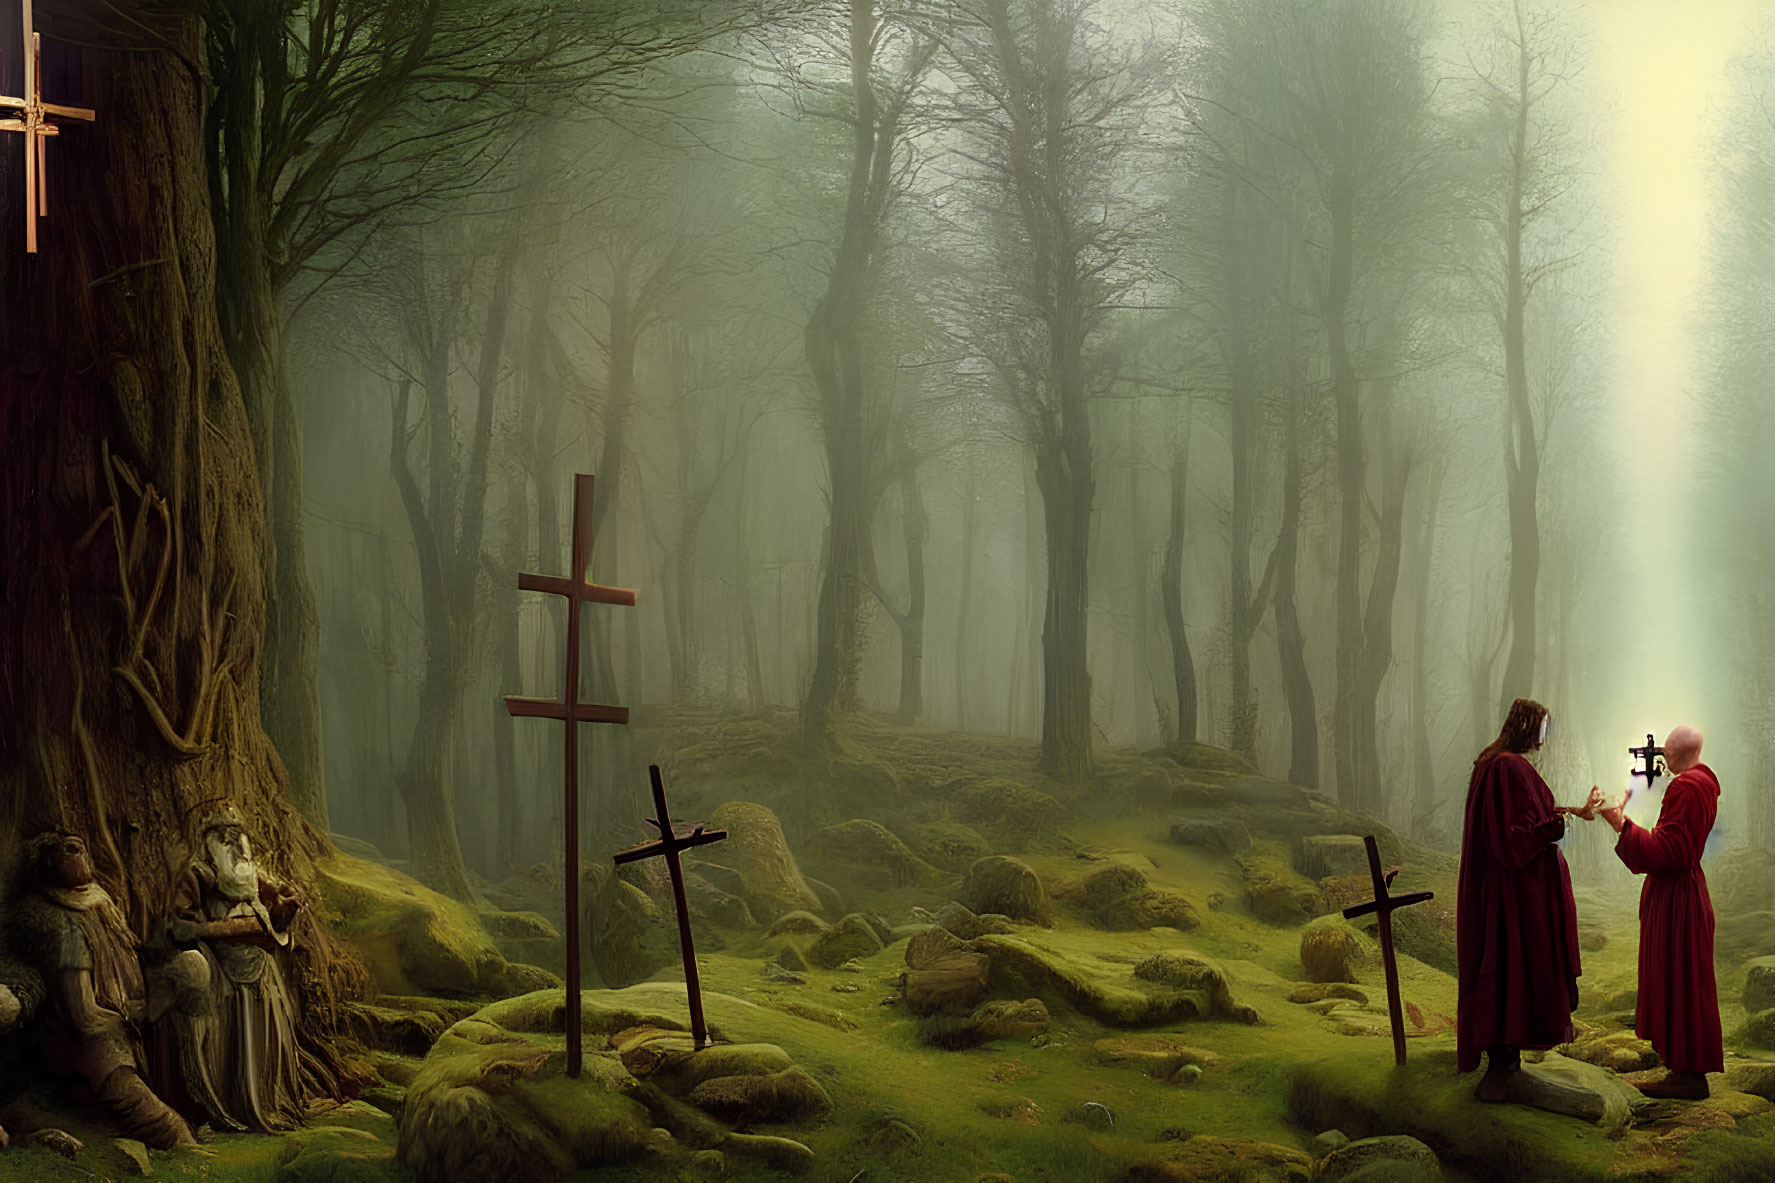 Ethereal misty forest scene with robed figures and crosses